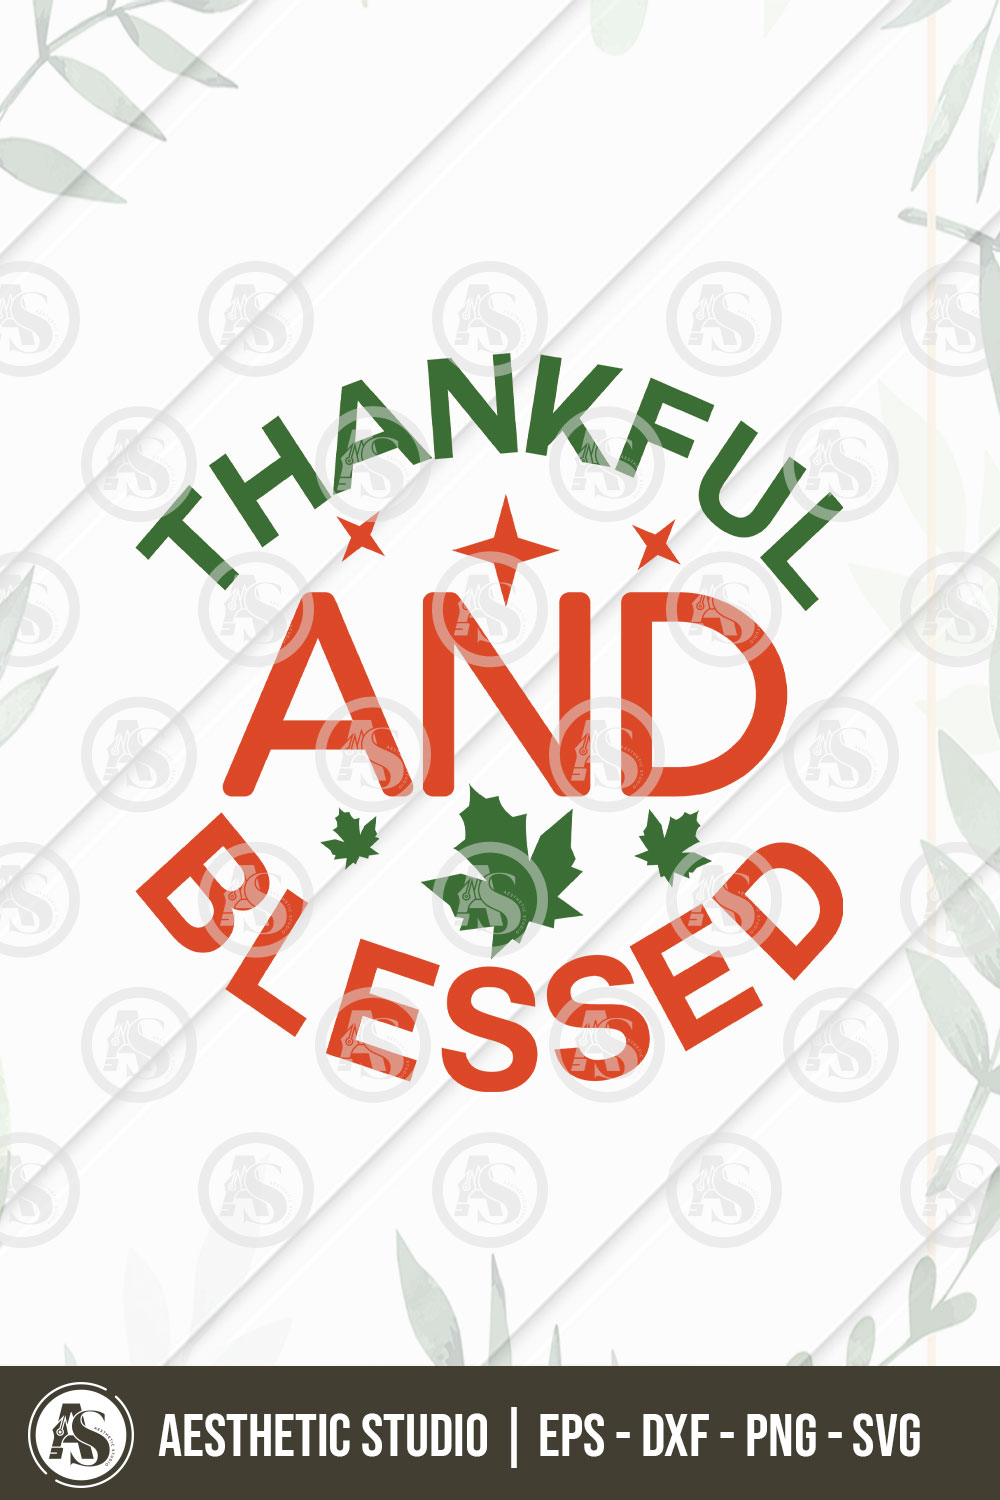 Thankful And Blessed Svg, Thanksgiving Day, Thanksgiving Svg, Fall Svg, Pumpkin, Thanksgiving Shirt Png Cut Files, Turkey svg, Gobble Svg, Pumpkin Spice, Fall Leaves Svg, Autumn Svg, Grateful svg, Thanksgiving Quote, Cut Files for Cricut, Thanksgiving Sayings, pinterest preview image.